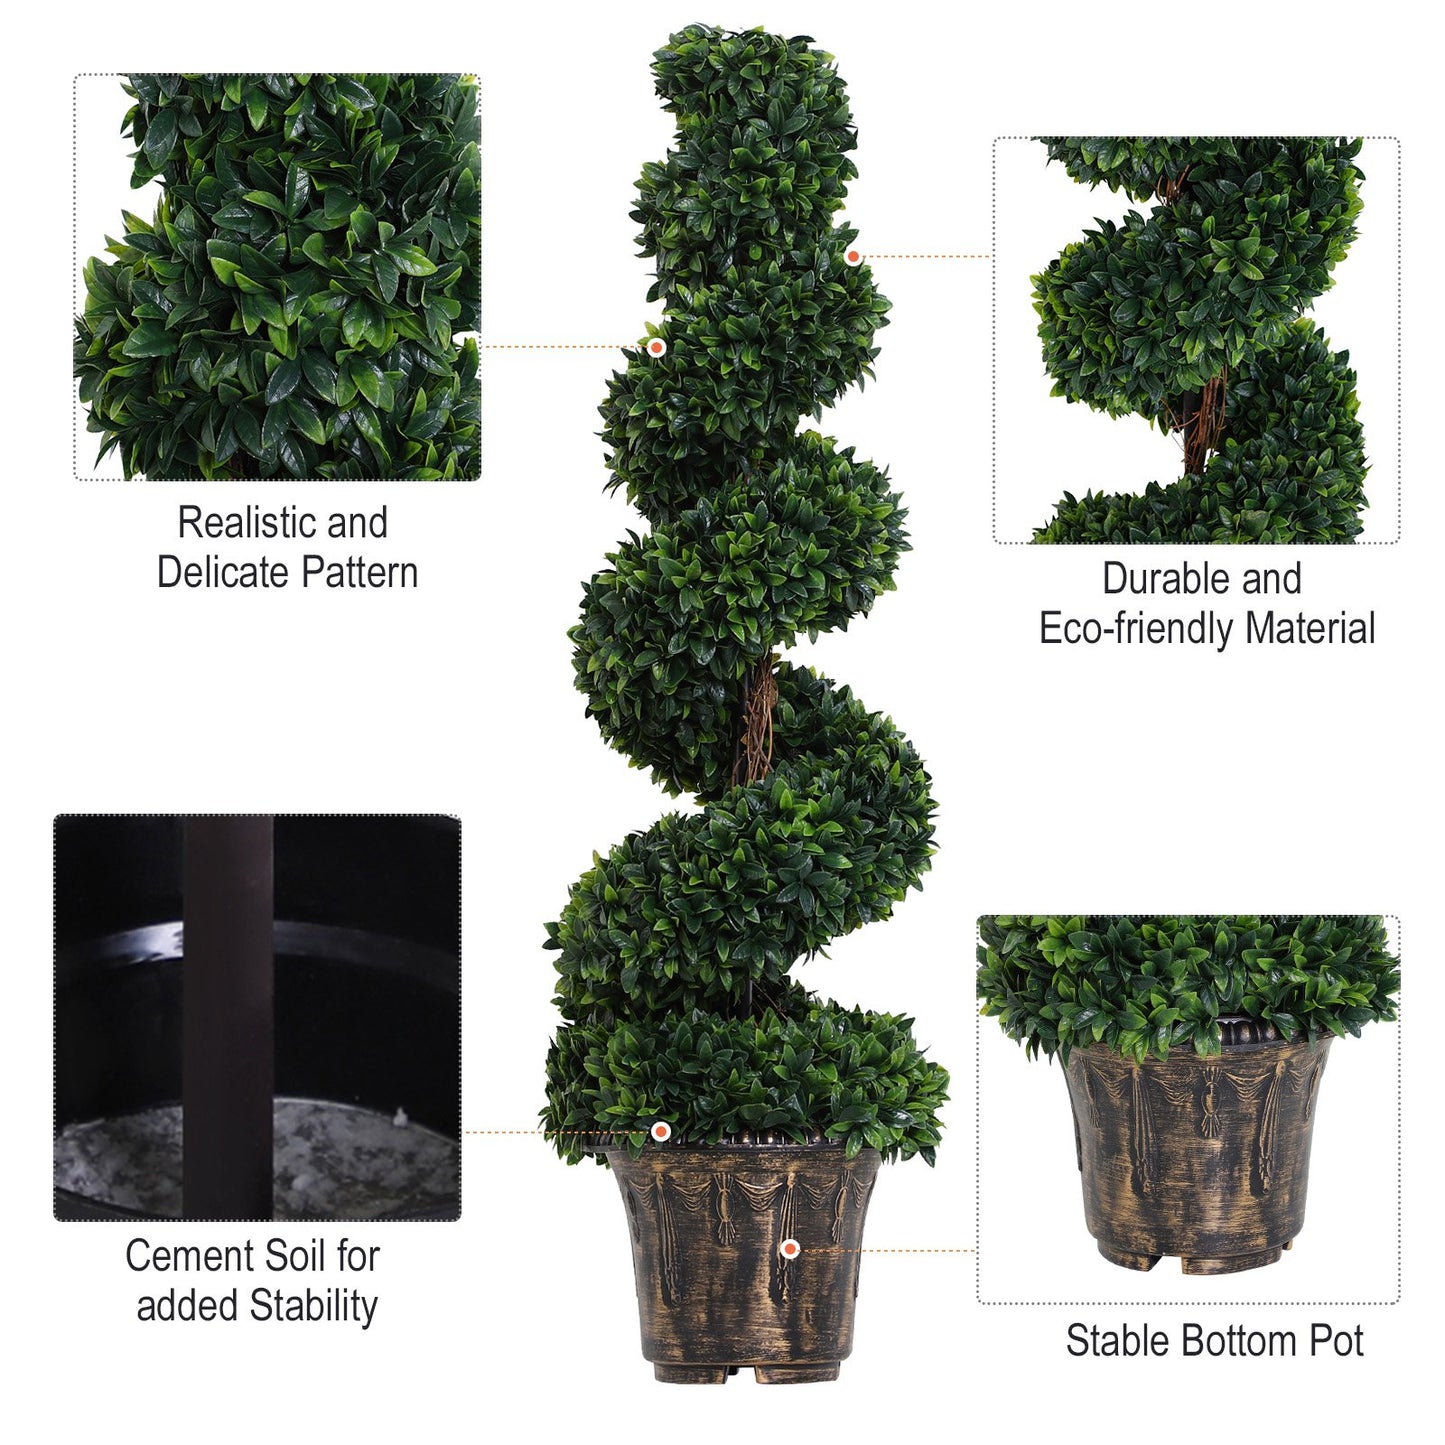 Outsunny PE Set of 2 Artificial Boxwood Spiral Topiary Plant Tree's Green